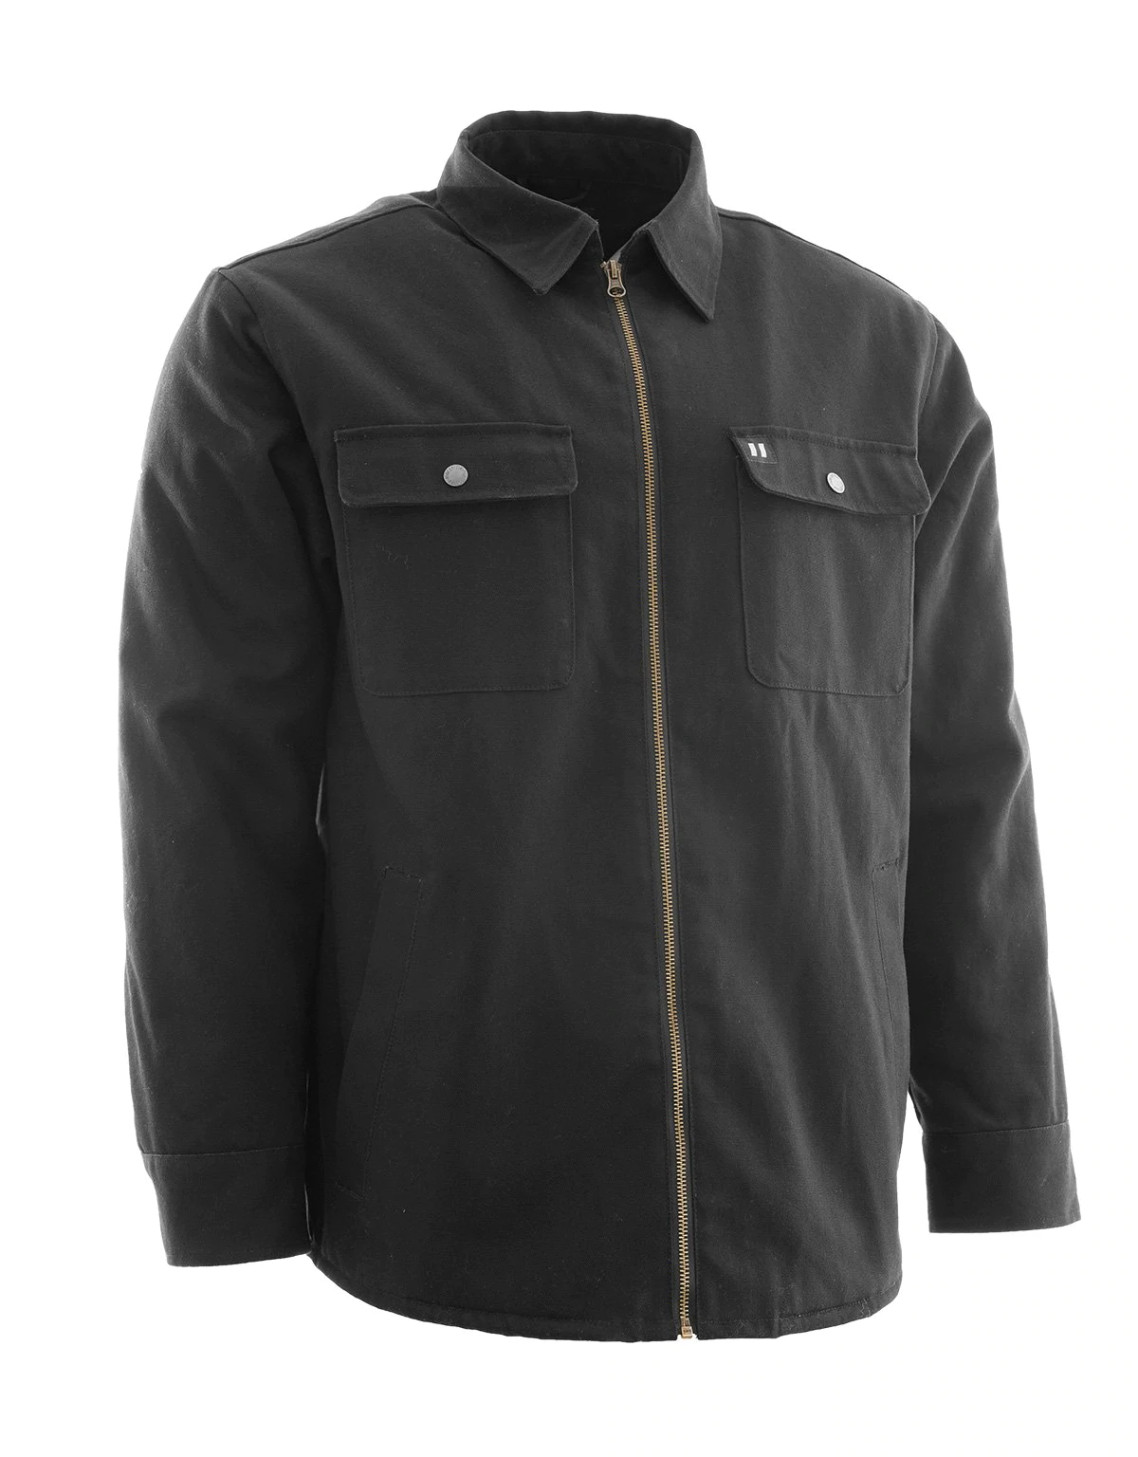 Forcefield Sherpa Lined Work Shirt | SafetyApparel.ca